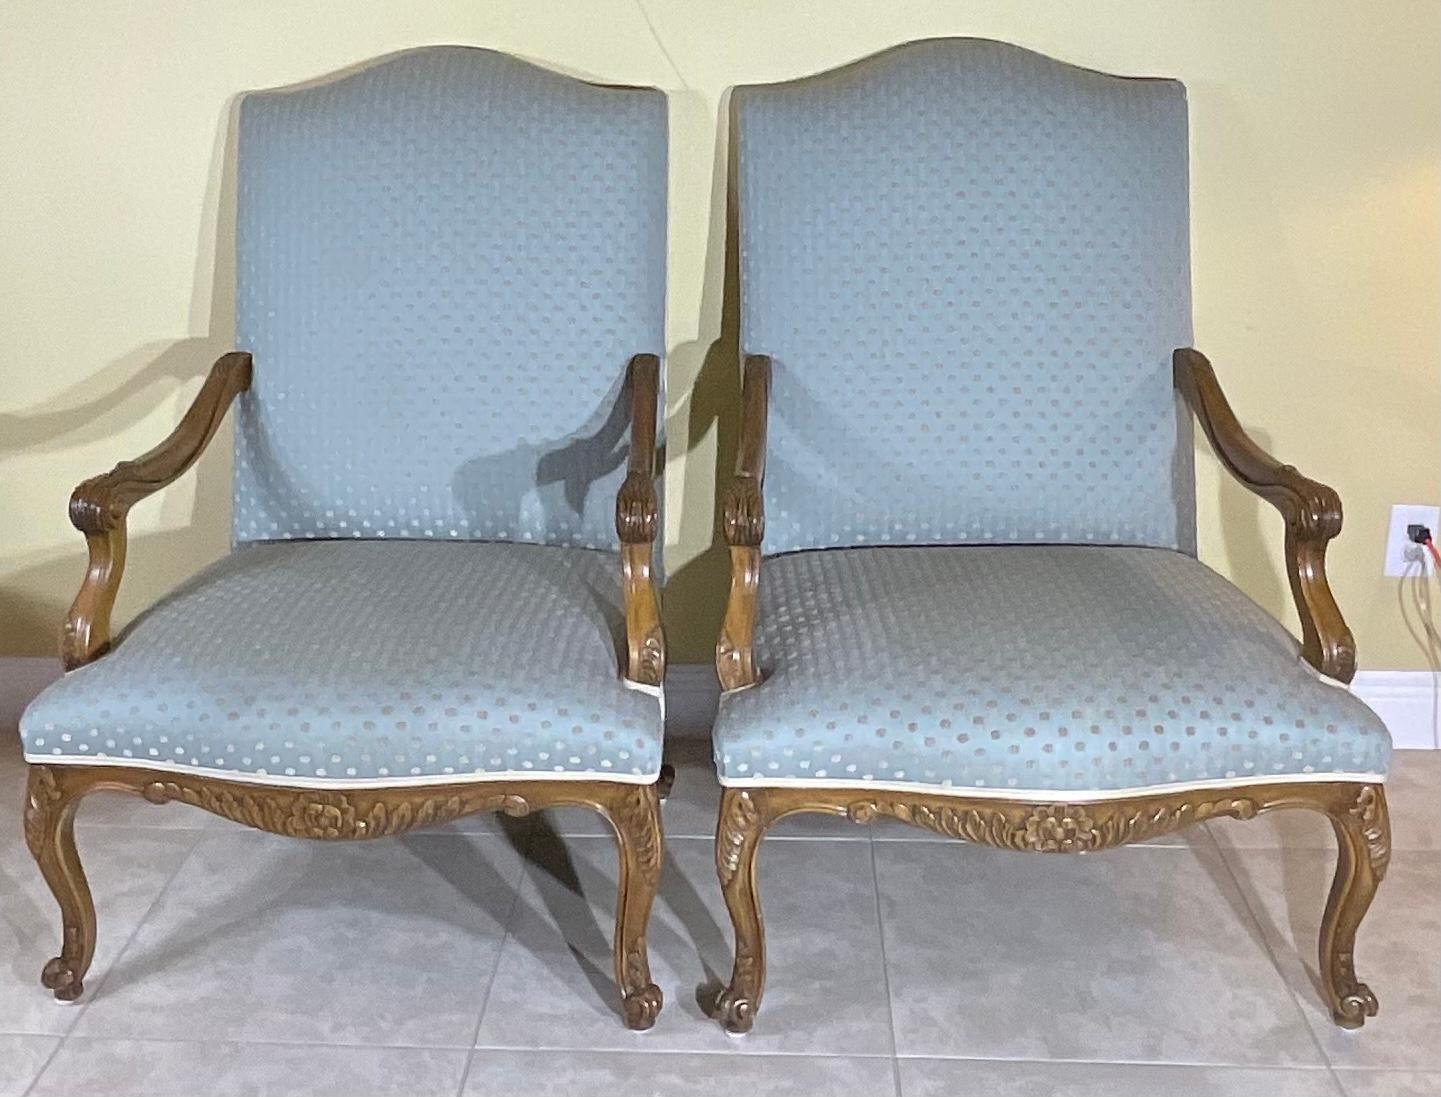 Gorgeous pair of hand carved armchair, quality updated upholstery. Sued like backing and trimming, classic French Style elegance. The chair nicely firm cushioned and comfortable The interior seat measures: 25”wide x 22” deep. Very good vintage